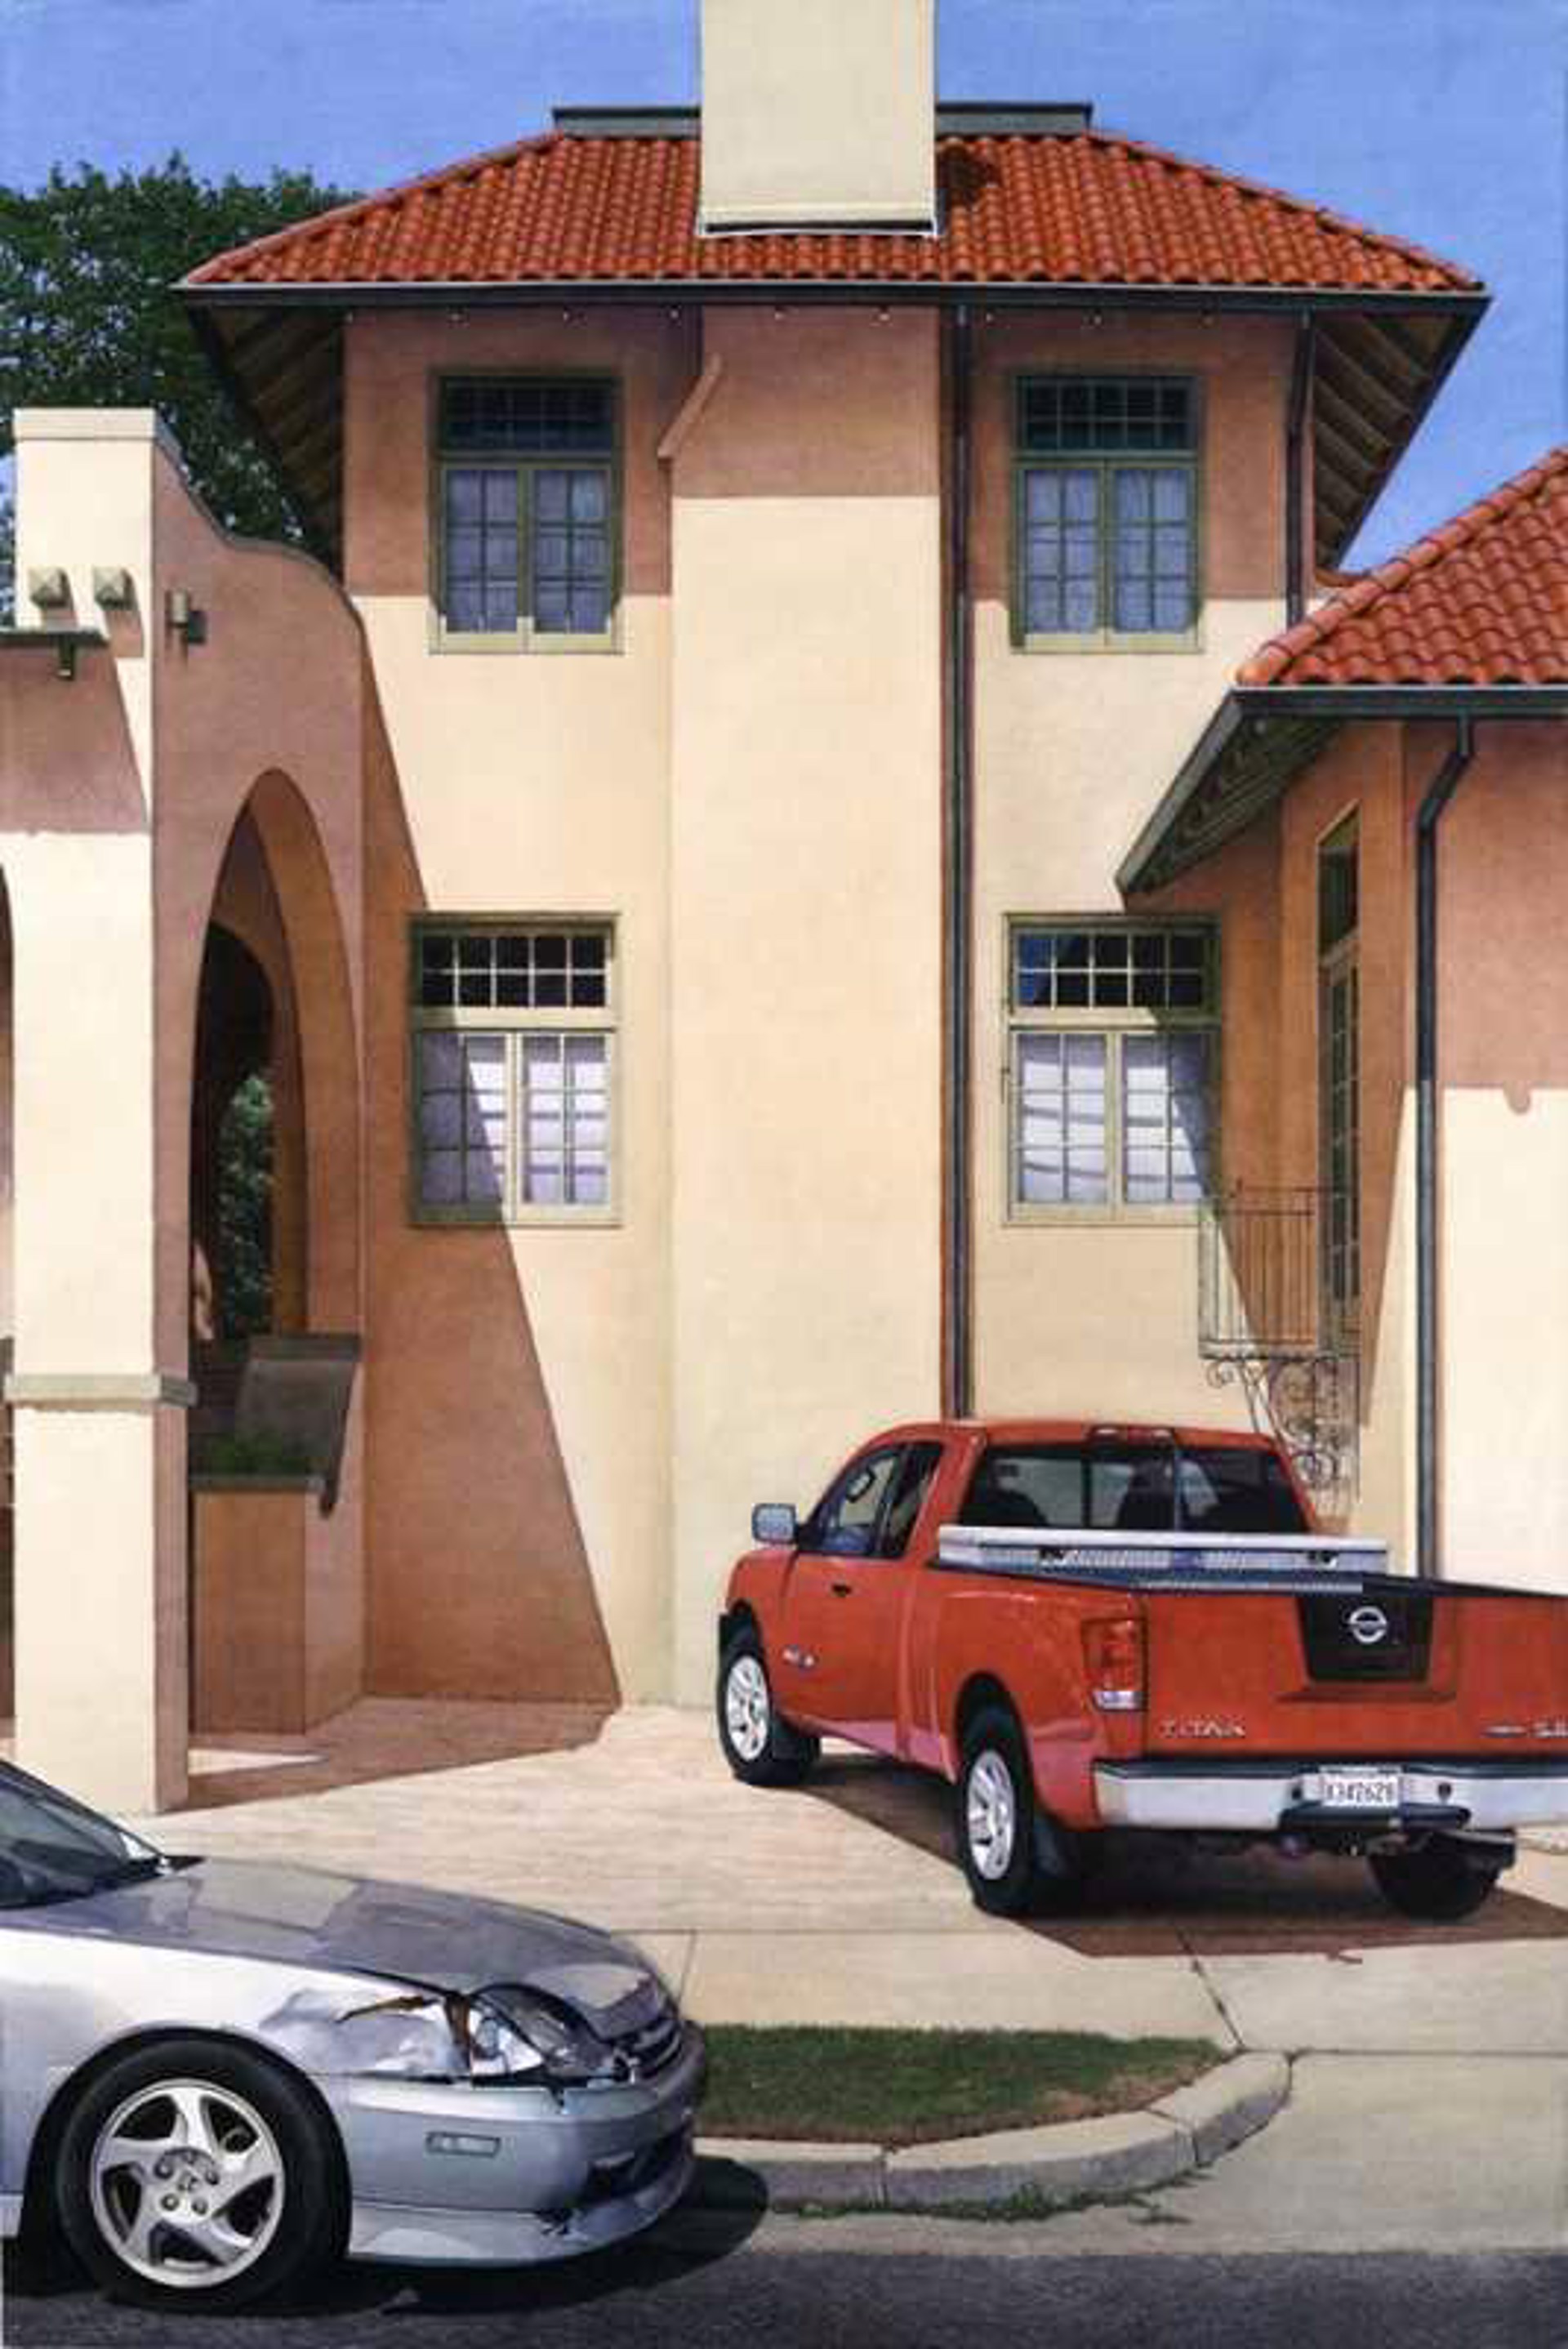 Driveway with Red Truck, Toulouse at City Park Avenue by Stephan Hoffpauir